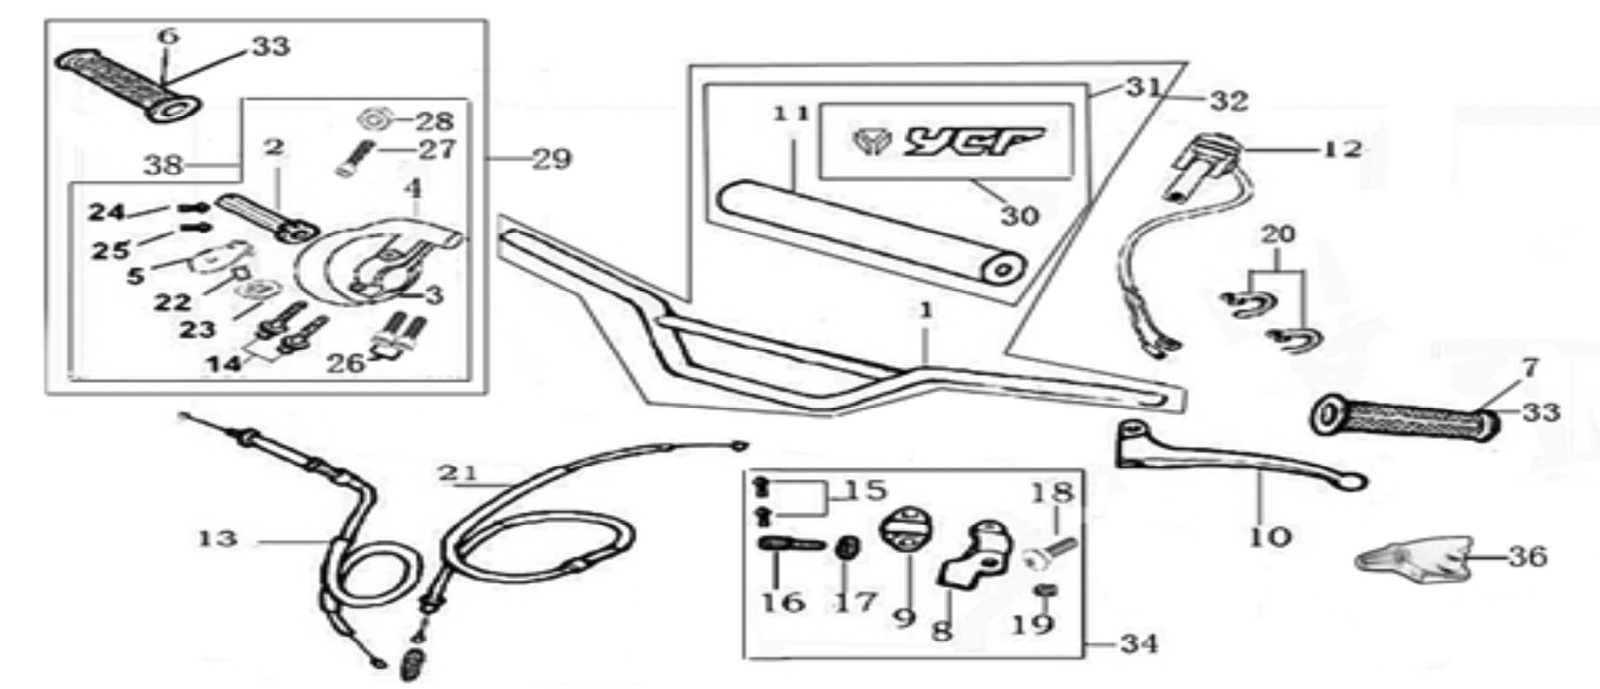 01 Handle bar assembly